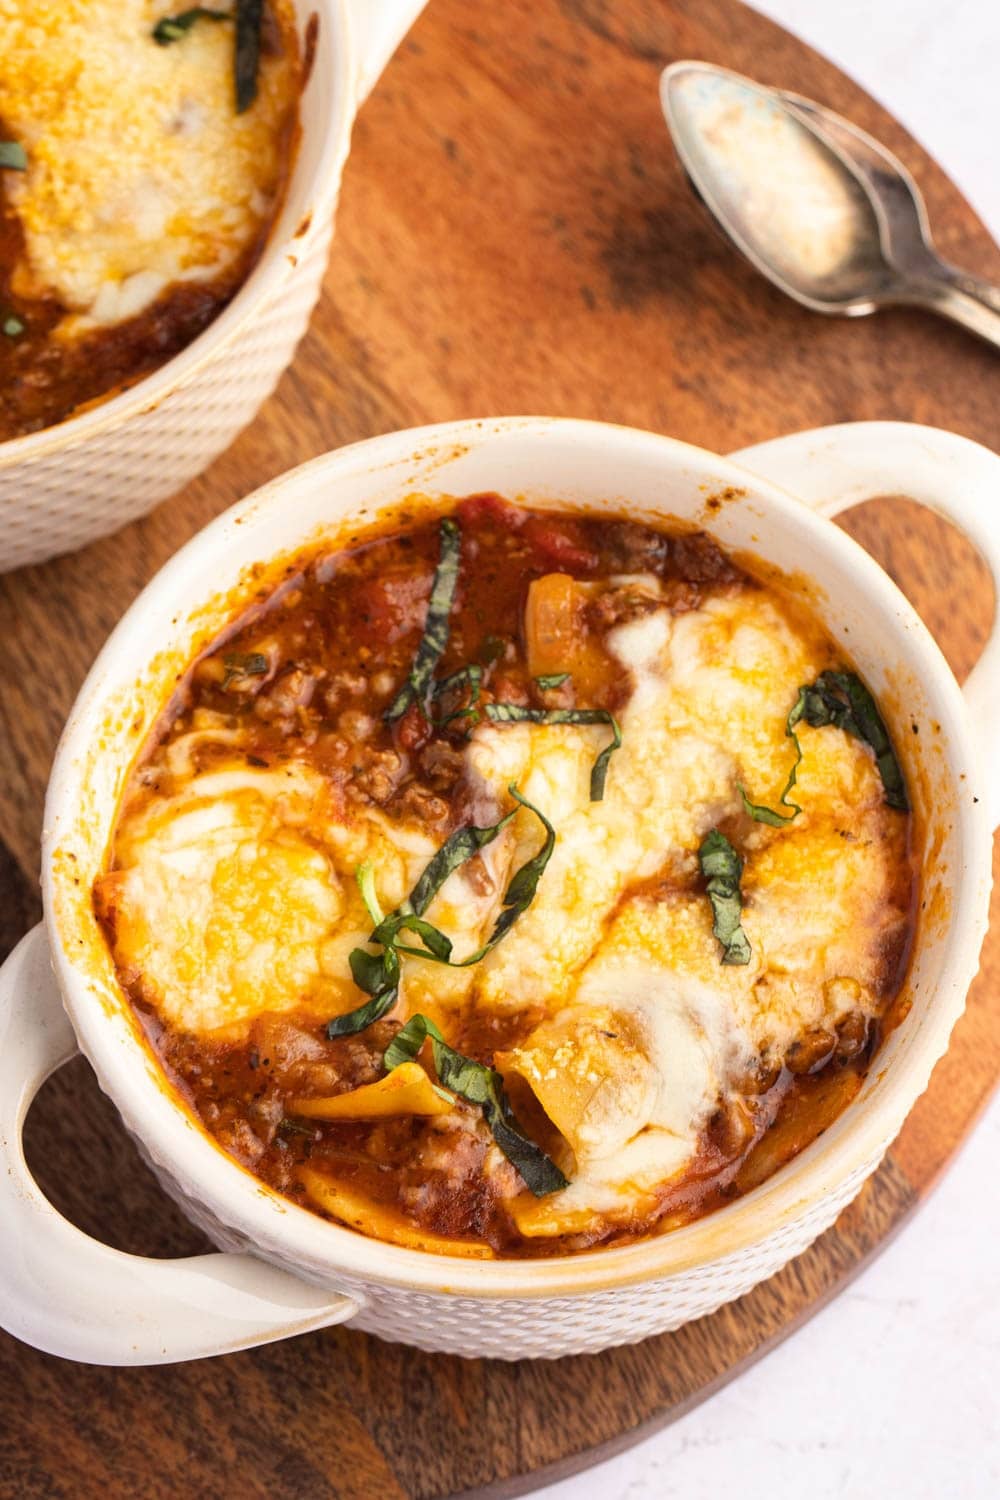 Bake Lasagna Soup with ground beef, tomato sauce and cheese served in a round casserole on a wooden board